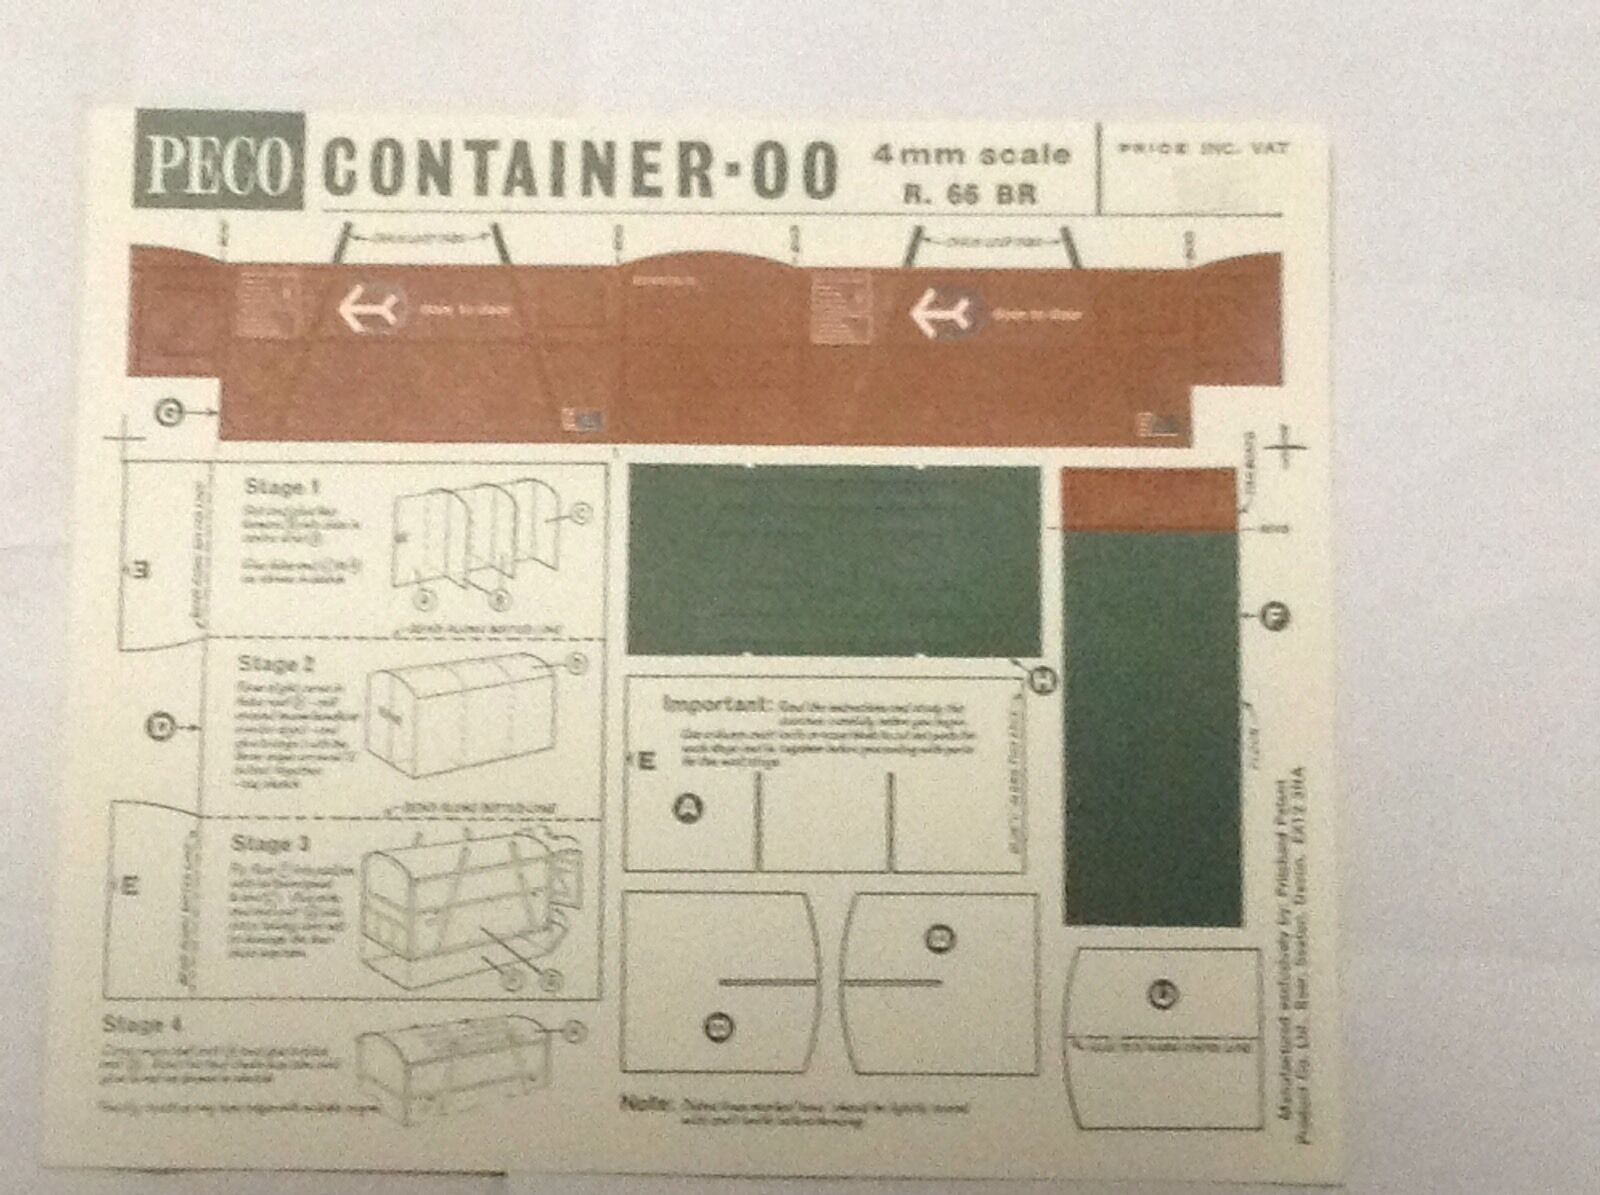 PECO CONTAINER KIT OO R. 66 BR 4mm SCALE ENGLAND SUIT LIMA HORNBY TRIANG OO/HO